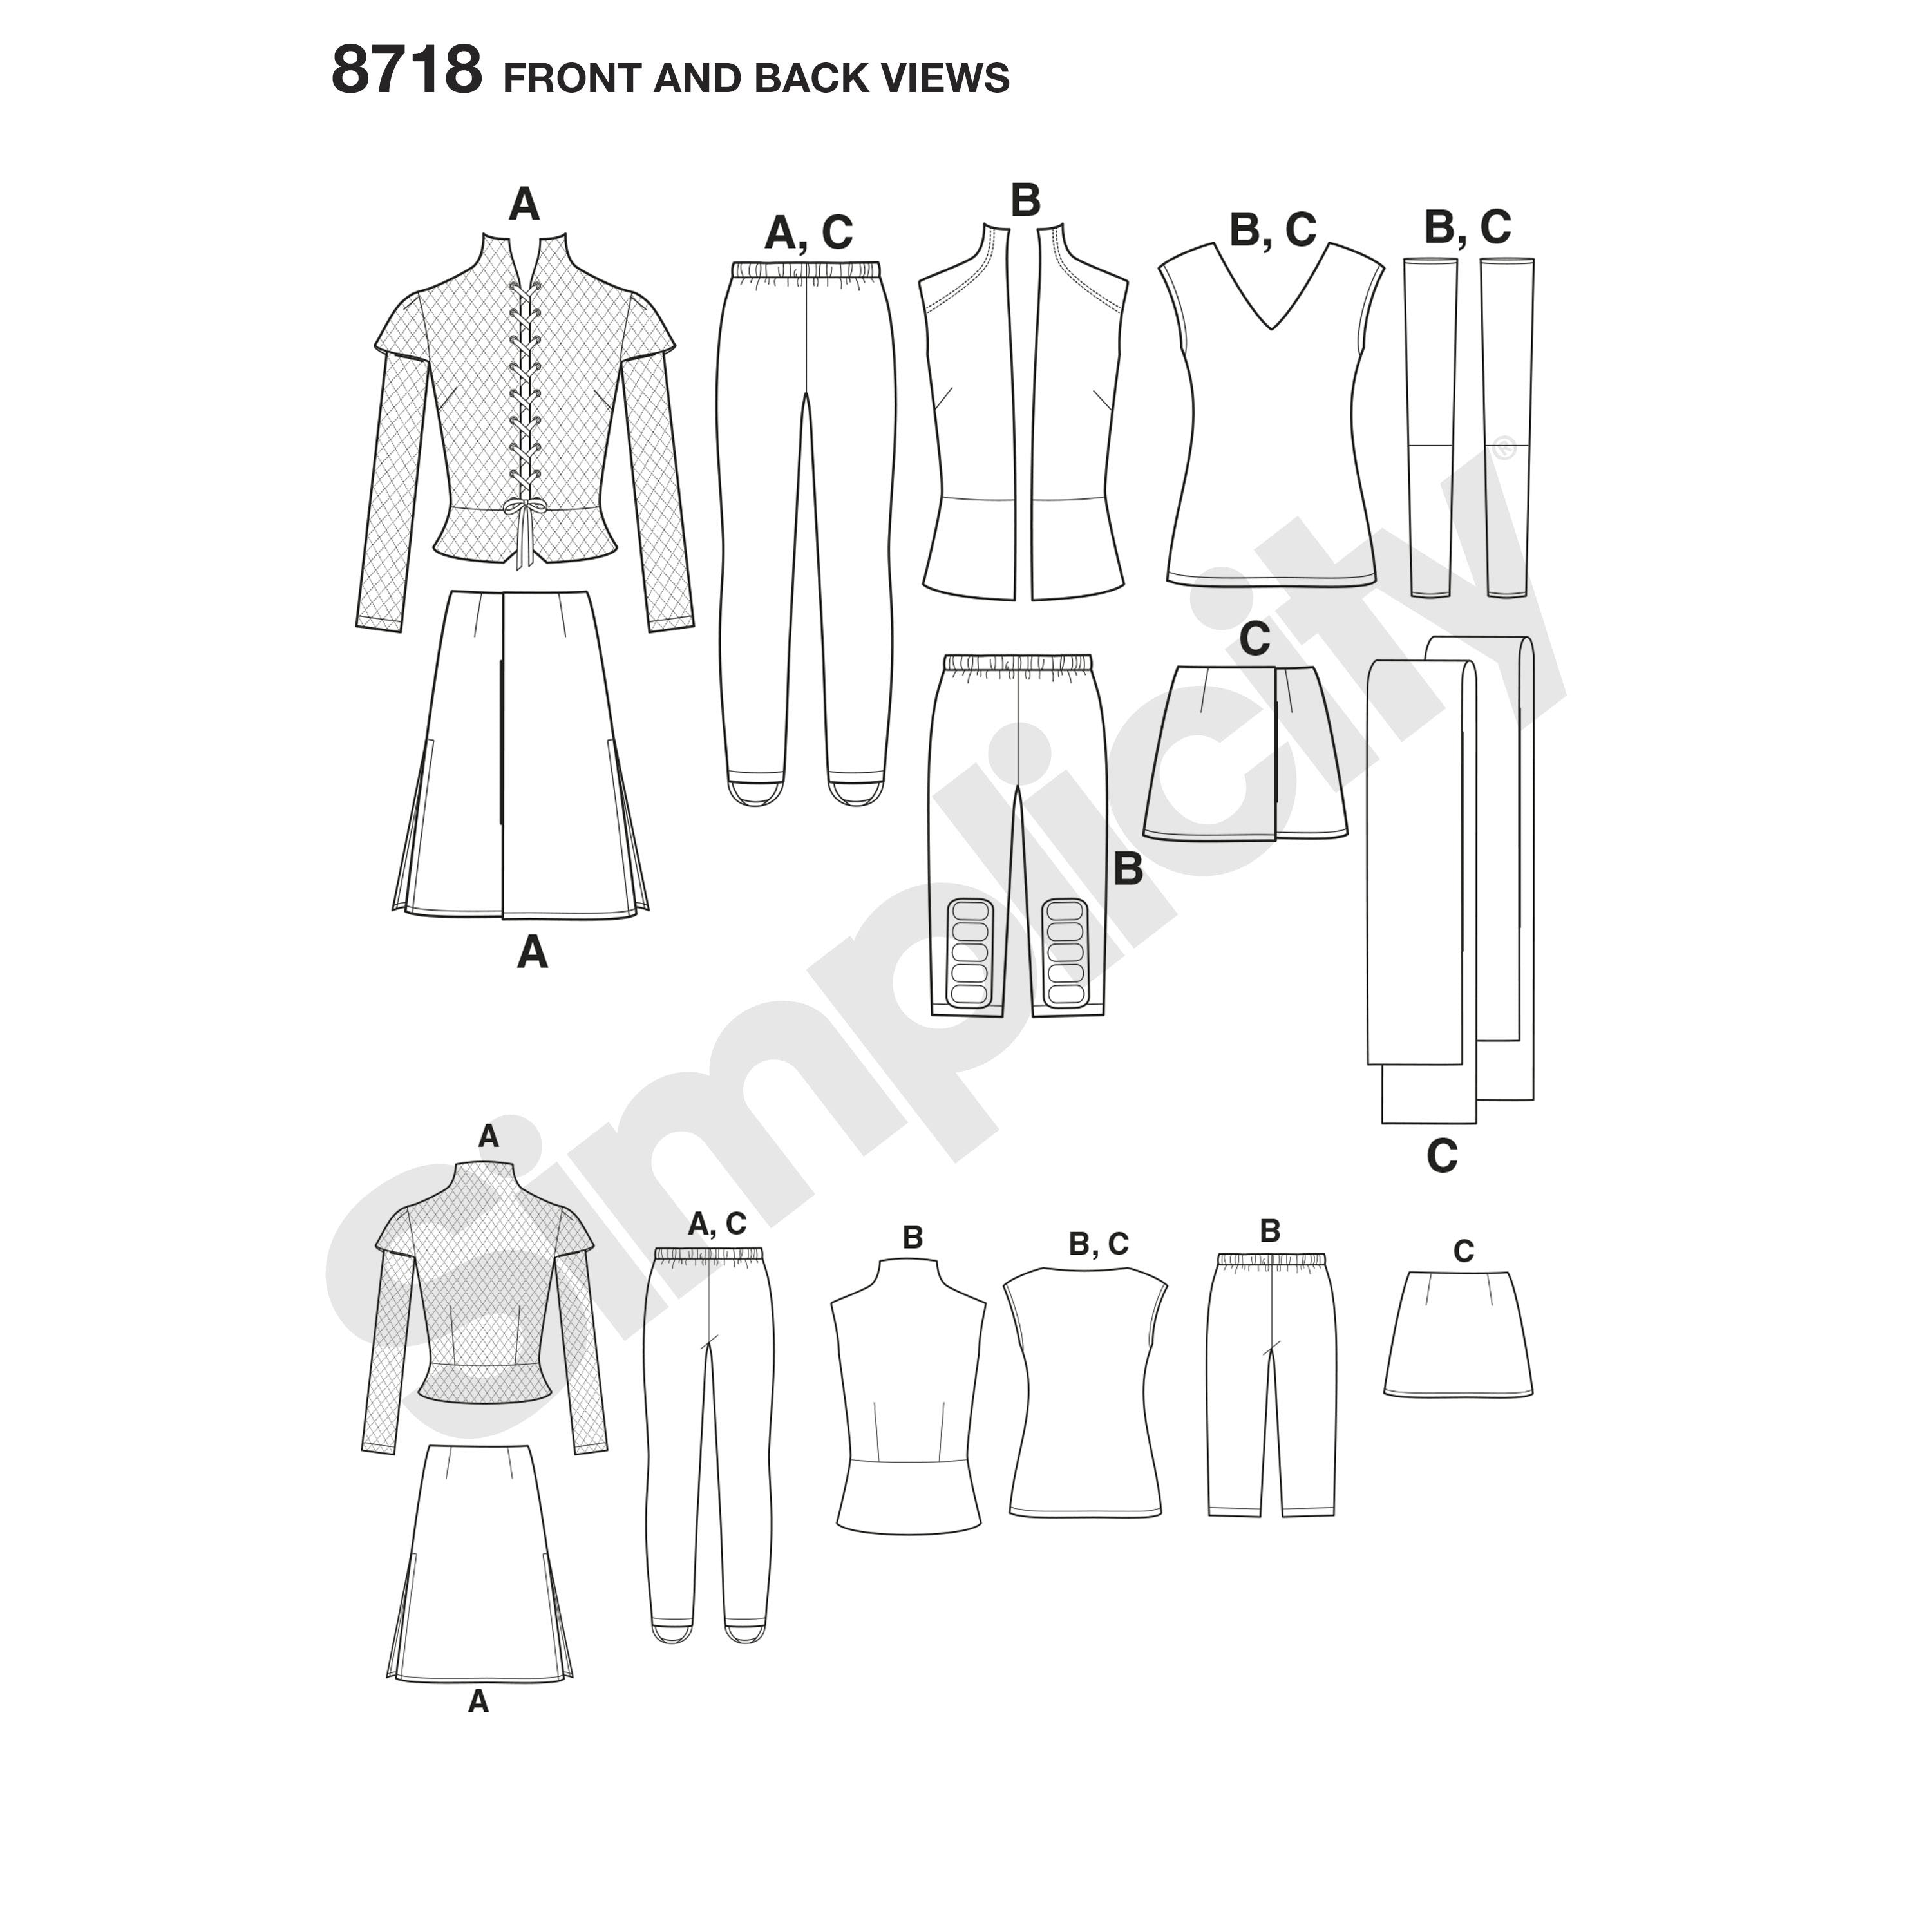 Simplicity Pattern 8718 womens-warrior-costumes from Jaycotts Sewing Supplies